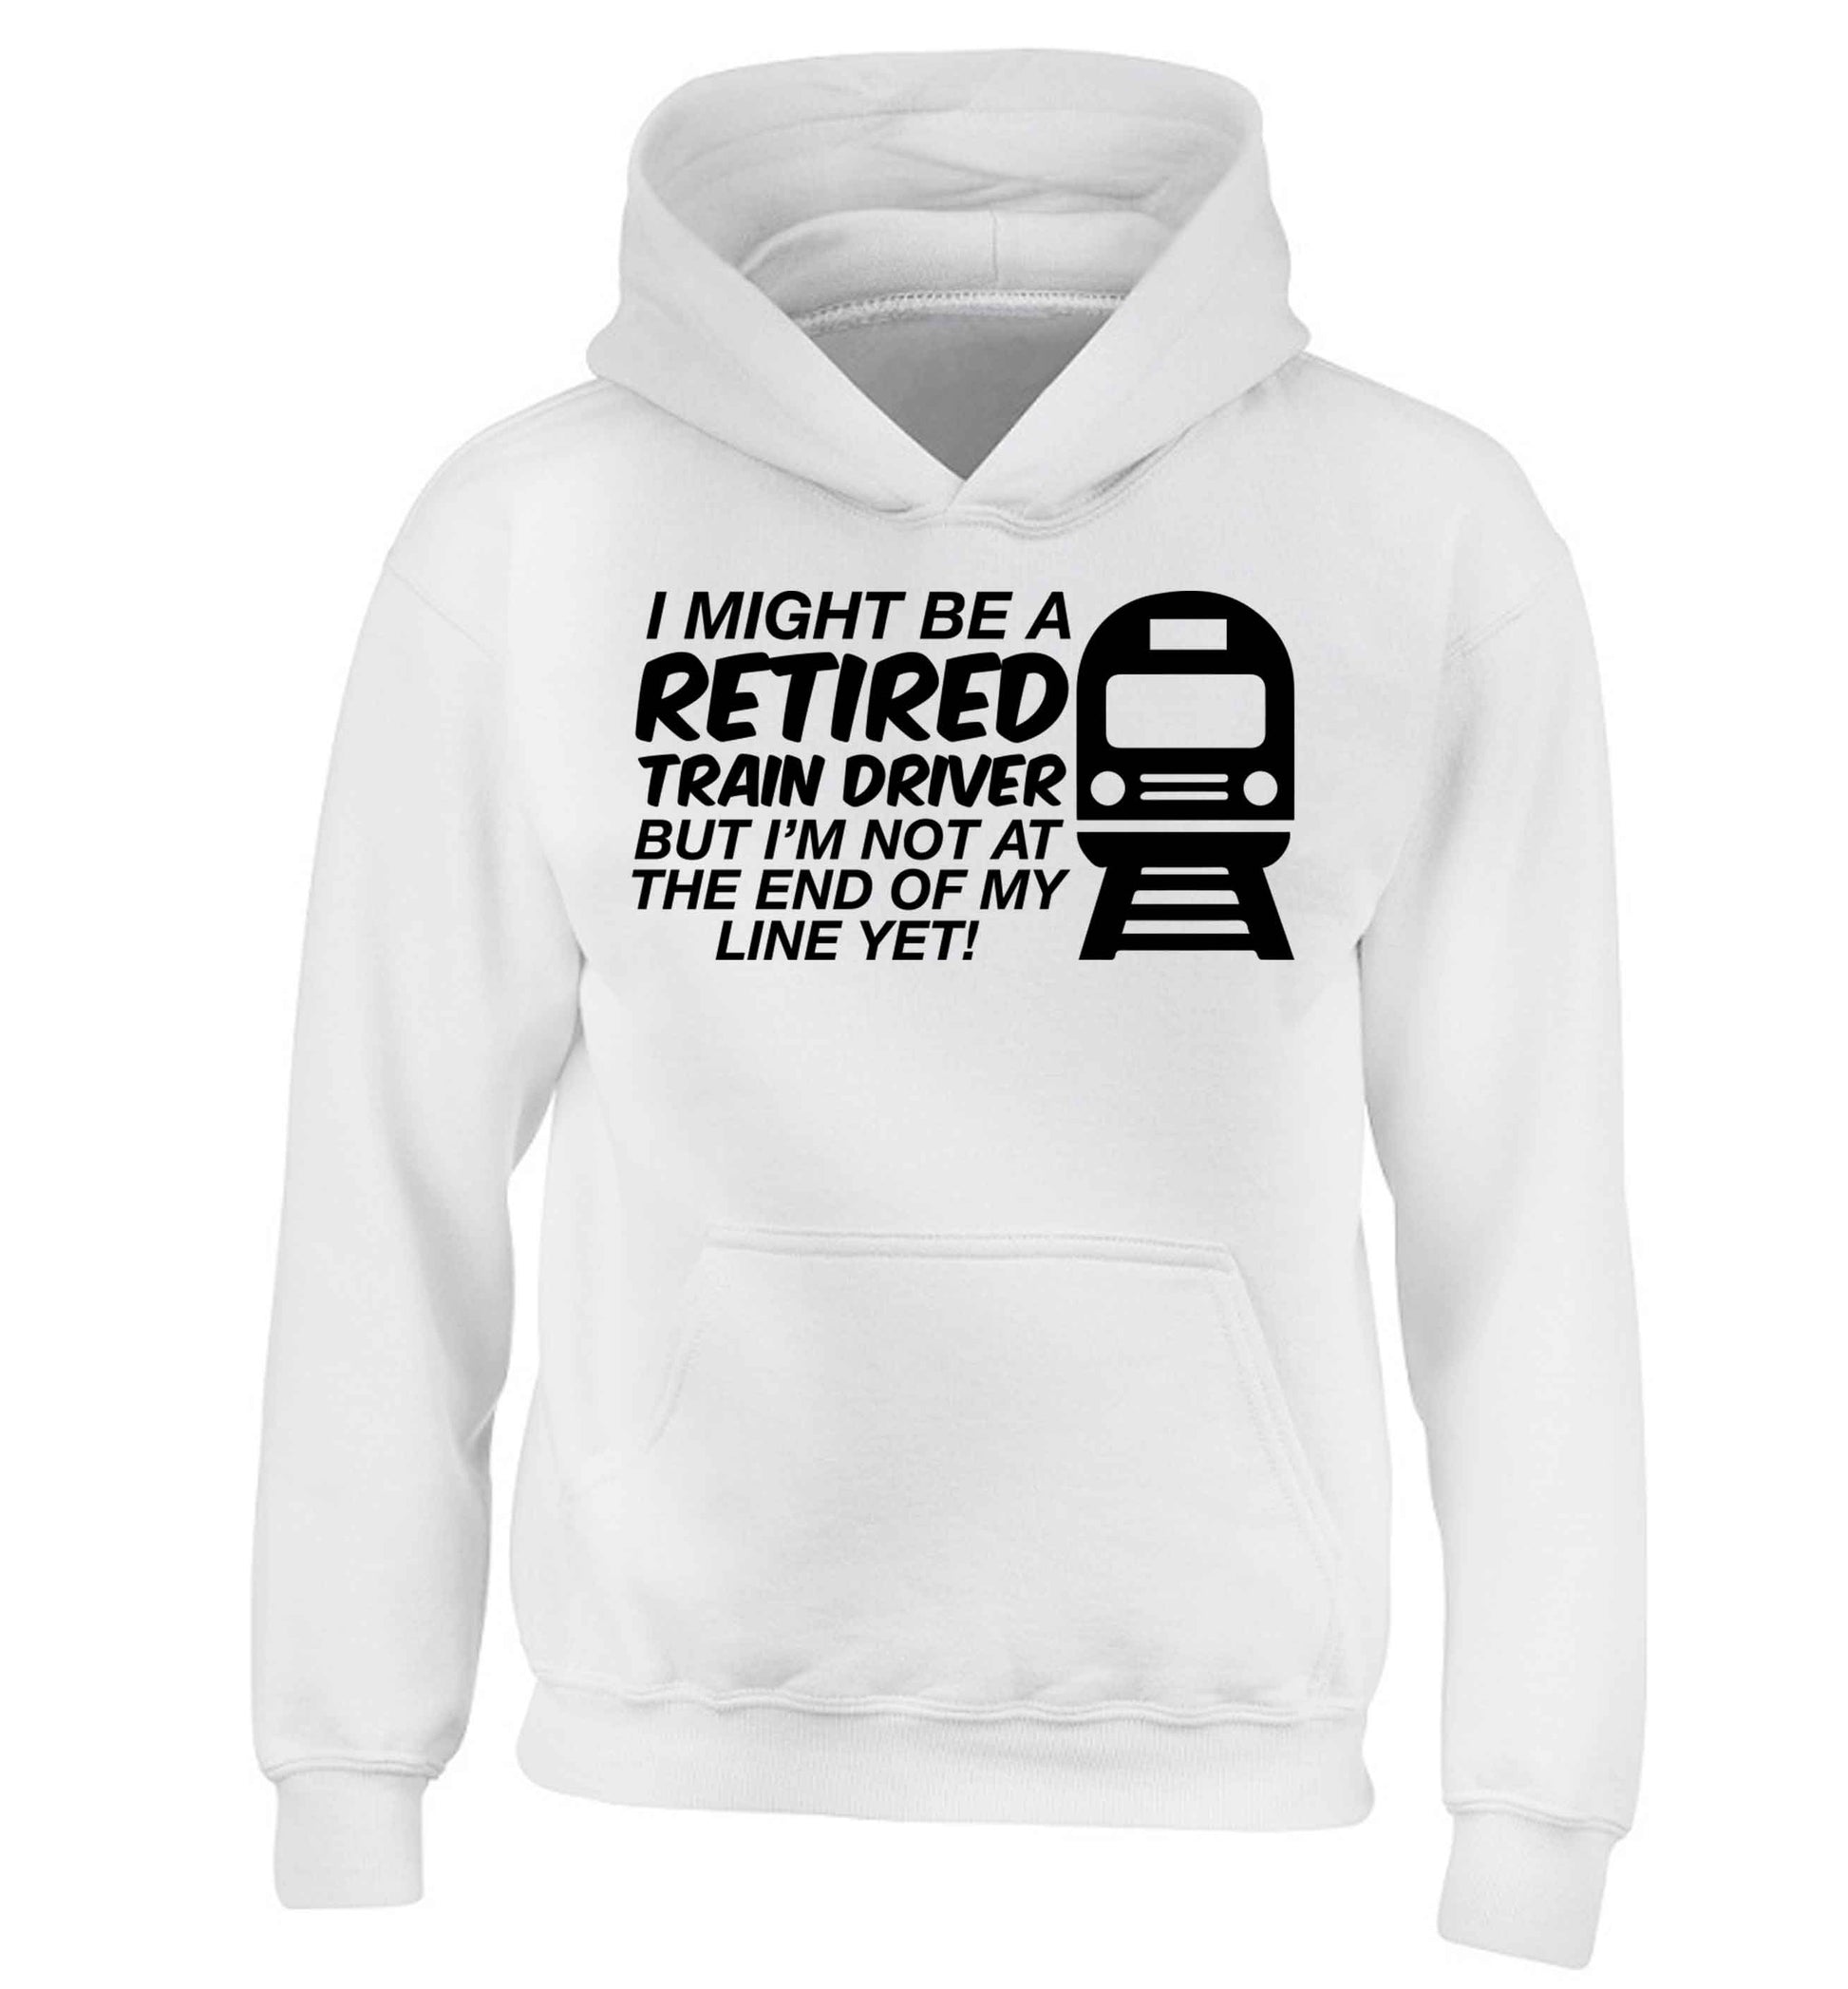 Retired train driver but I'm not at the end of my line yet children's white hoodie 12-13 Years